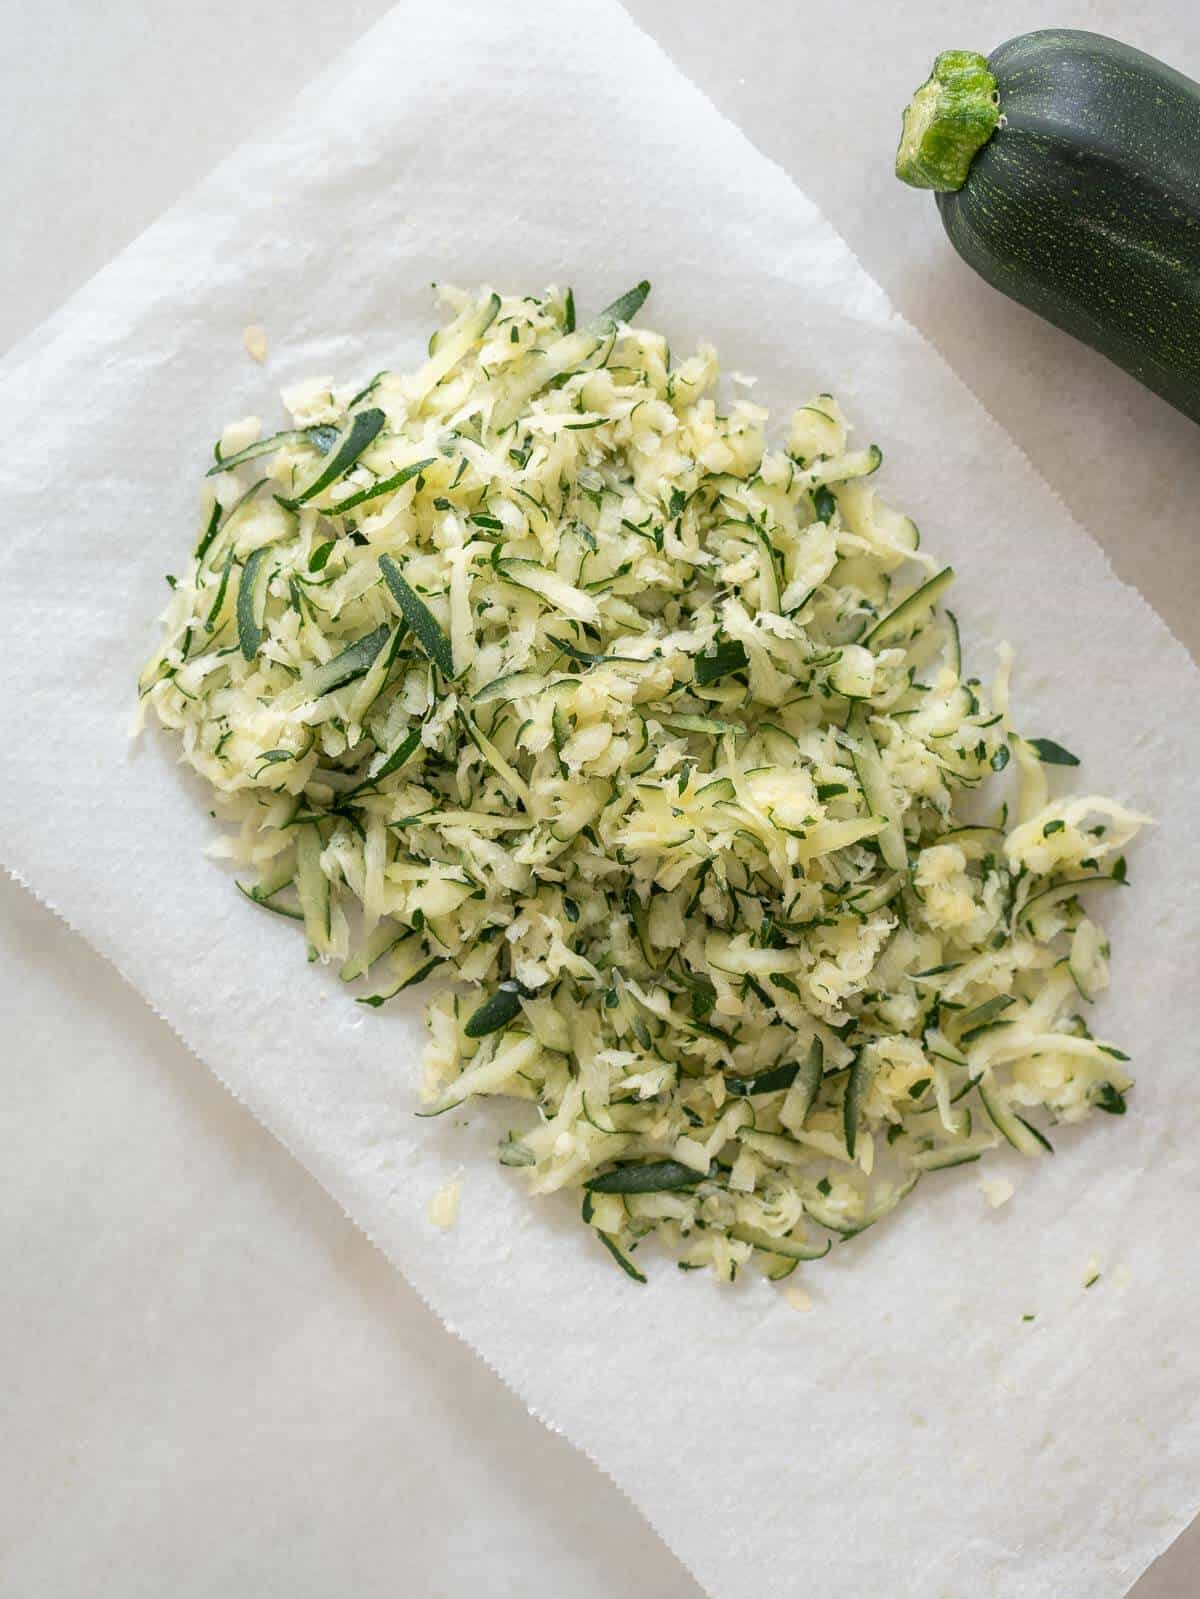 shredded zucchini laying on parchment paper.